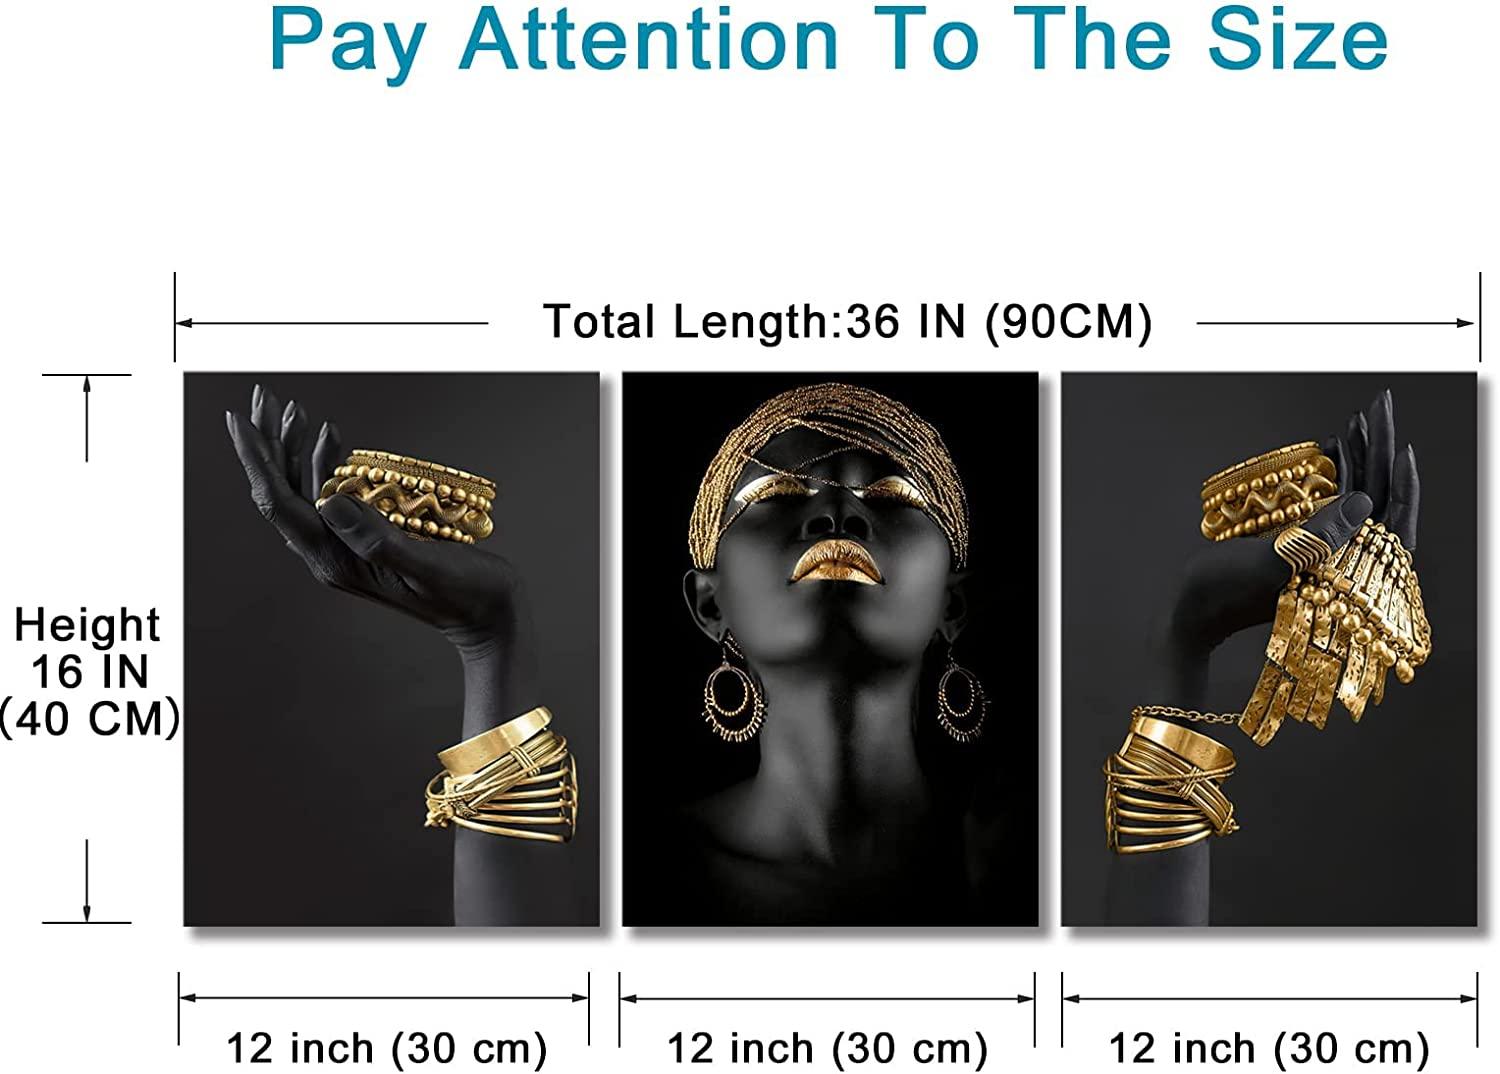 Black Gold African American Woman Canvas Wall Art, 3 Piece Set Fashion Golden Jewellery Print Picture Artwork, Modern Framed Poster Girl Bedroom Living Room Home Decorations, 12" X 16" X 3